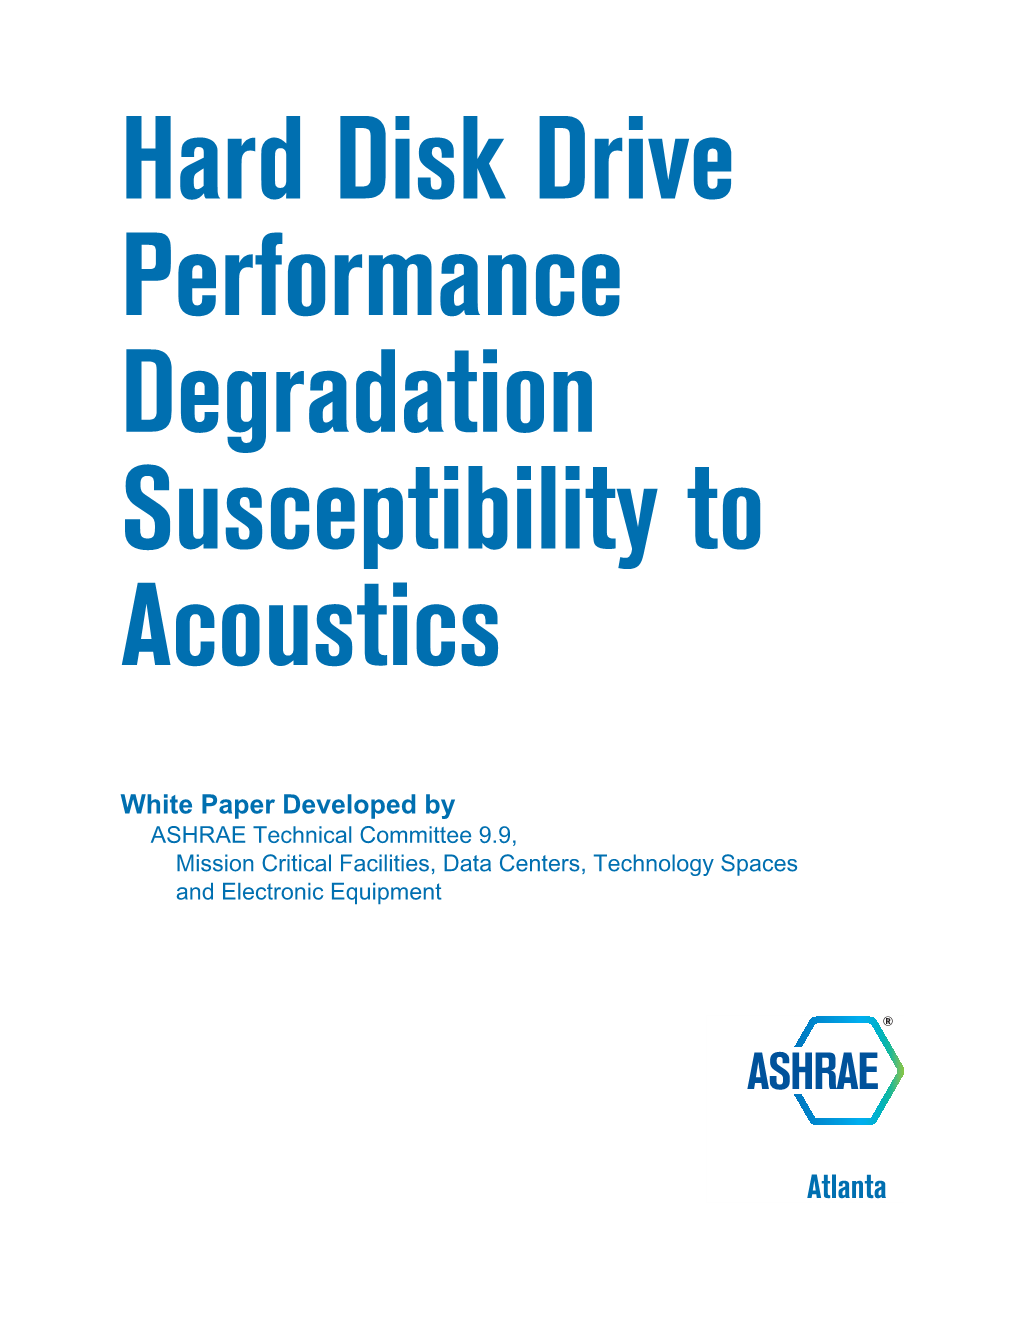 Hard Disk Drive Performance Degradation Susceptibility to Acoustics